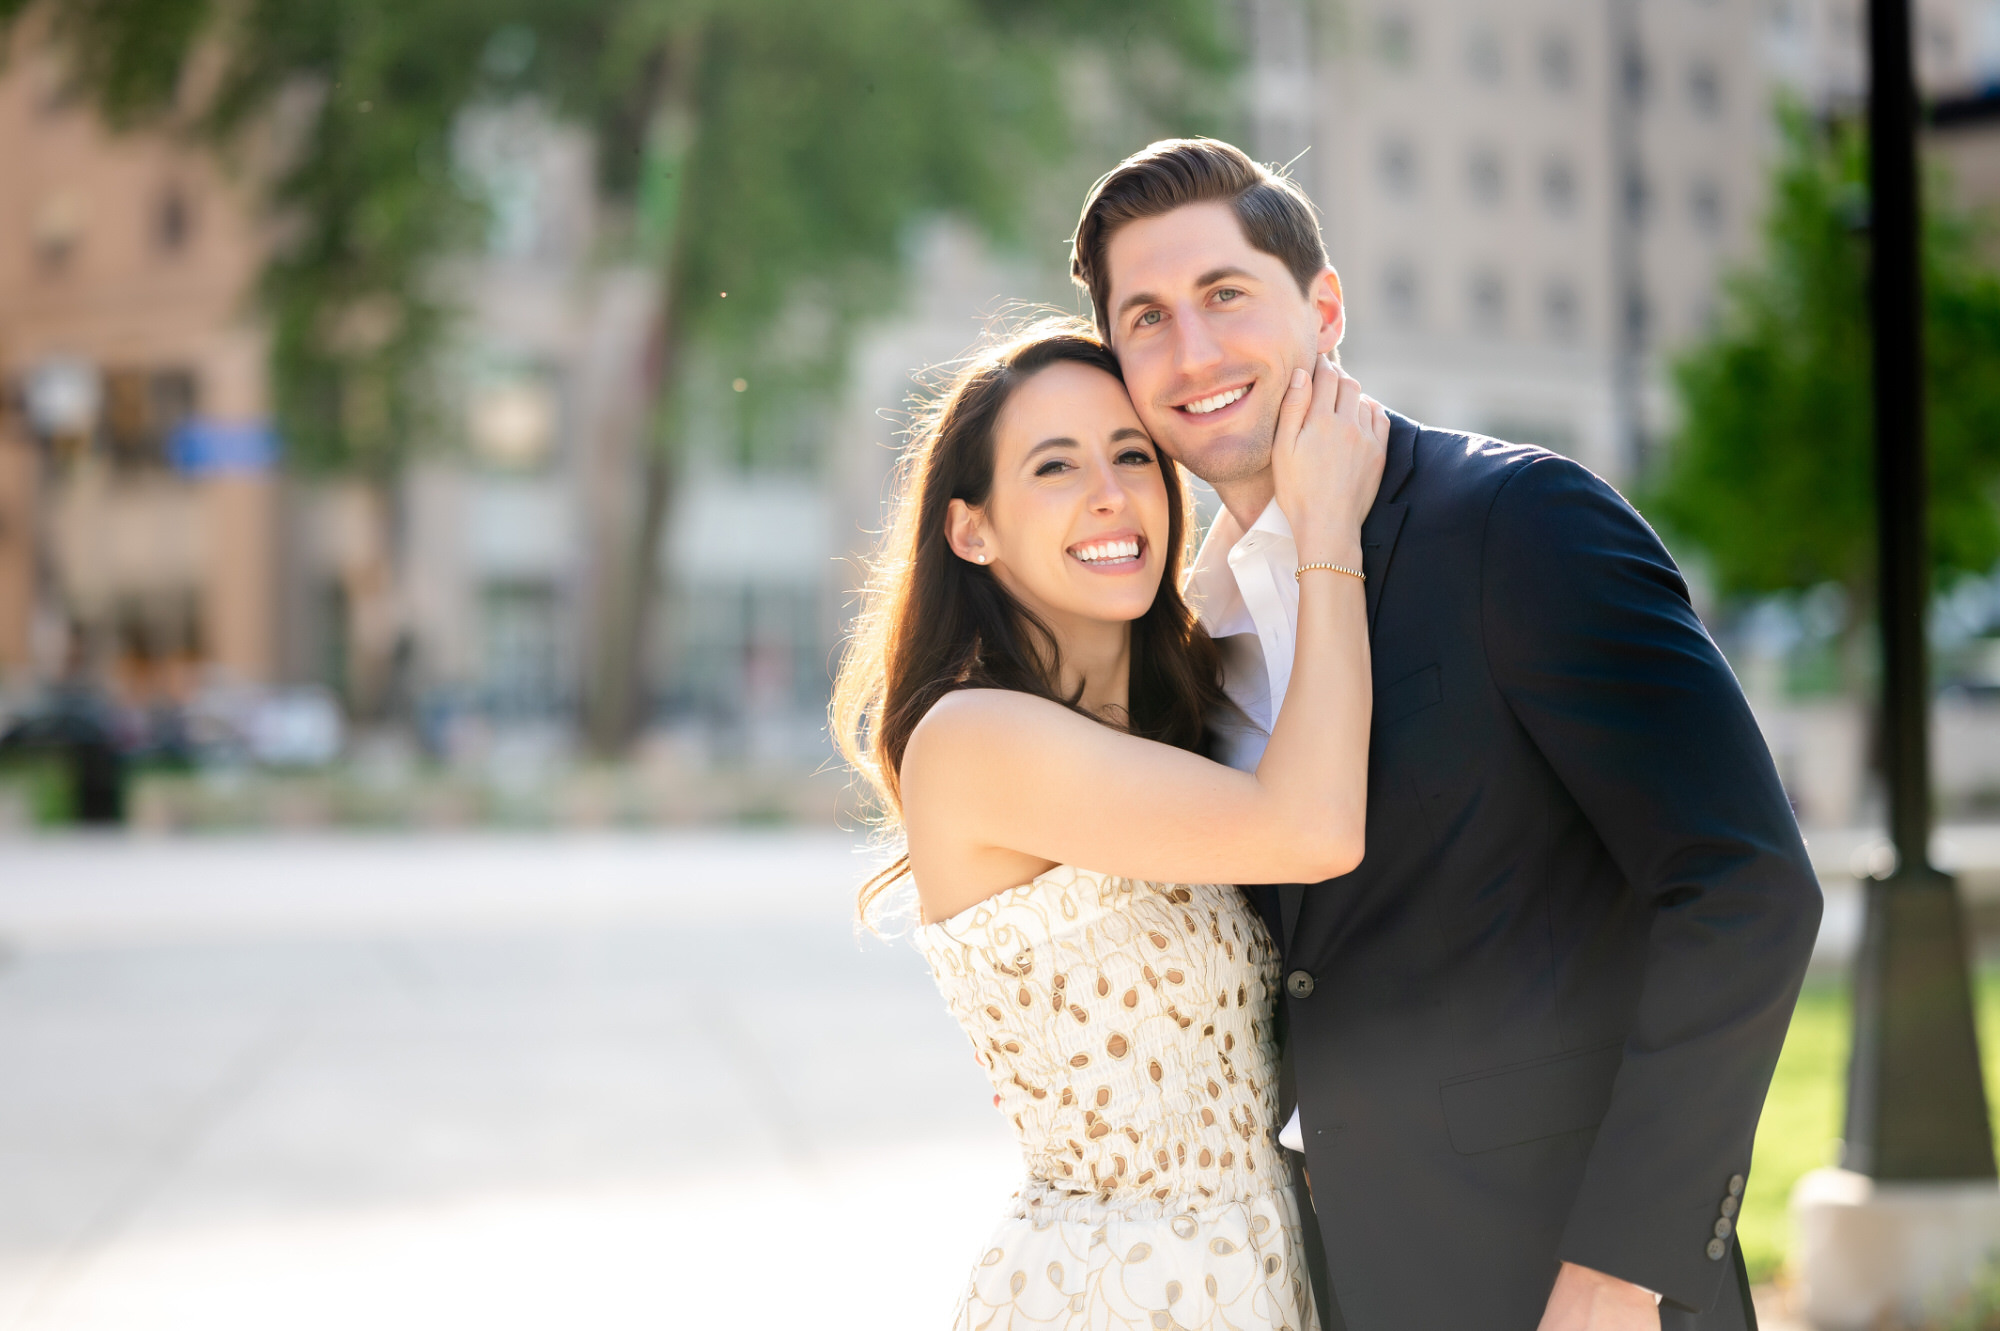 university of pittsburgh engagement picture • Engagements